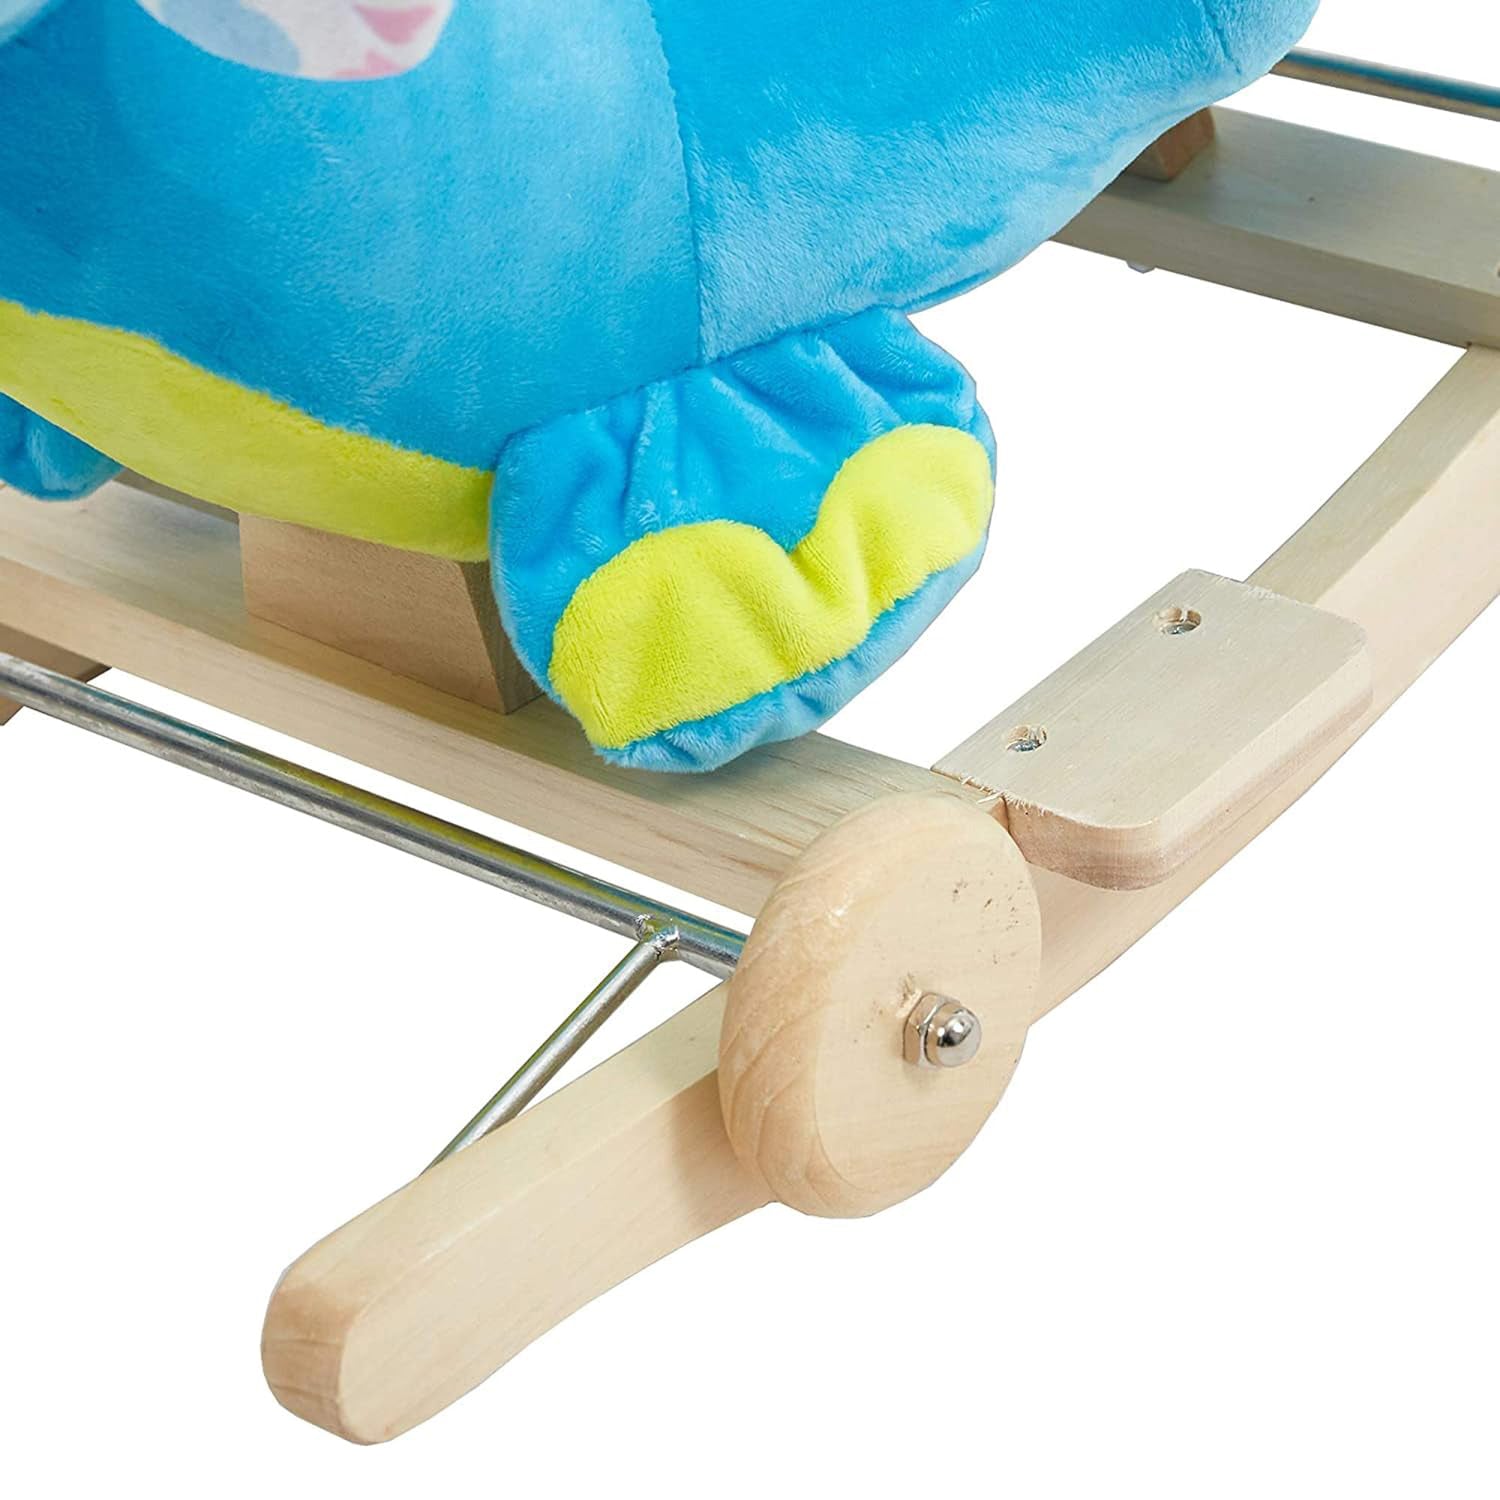 2-in-1 Ride-on Wooden Plush Rocking Horse Chair with Music for Baby Kids Toddlers, Blue Elephant